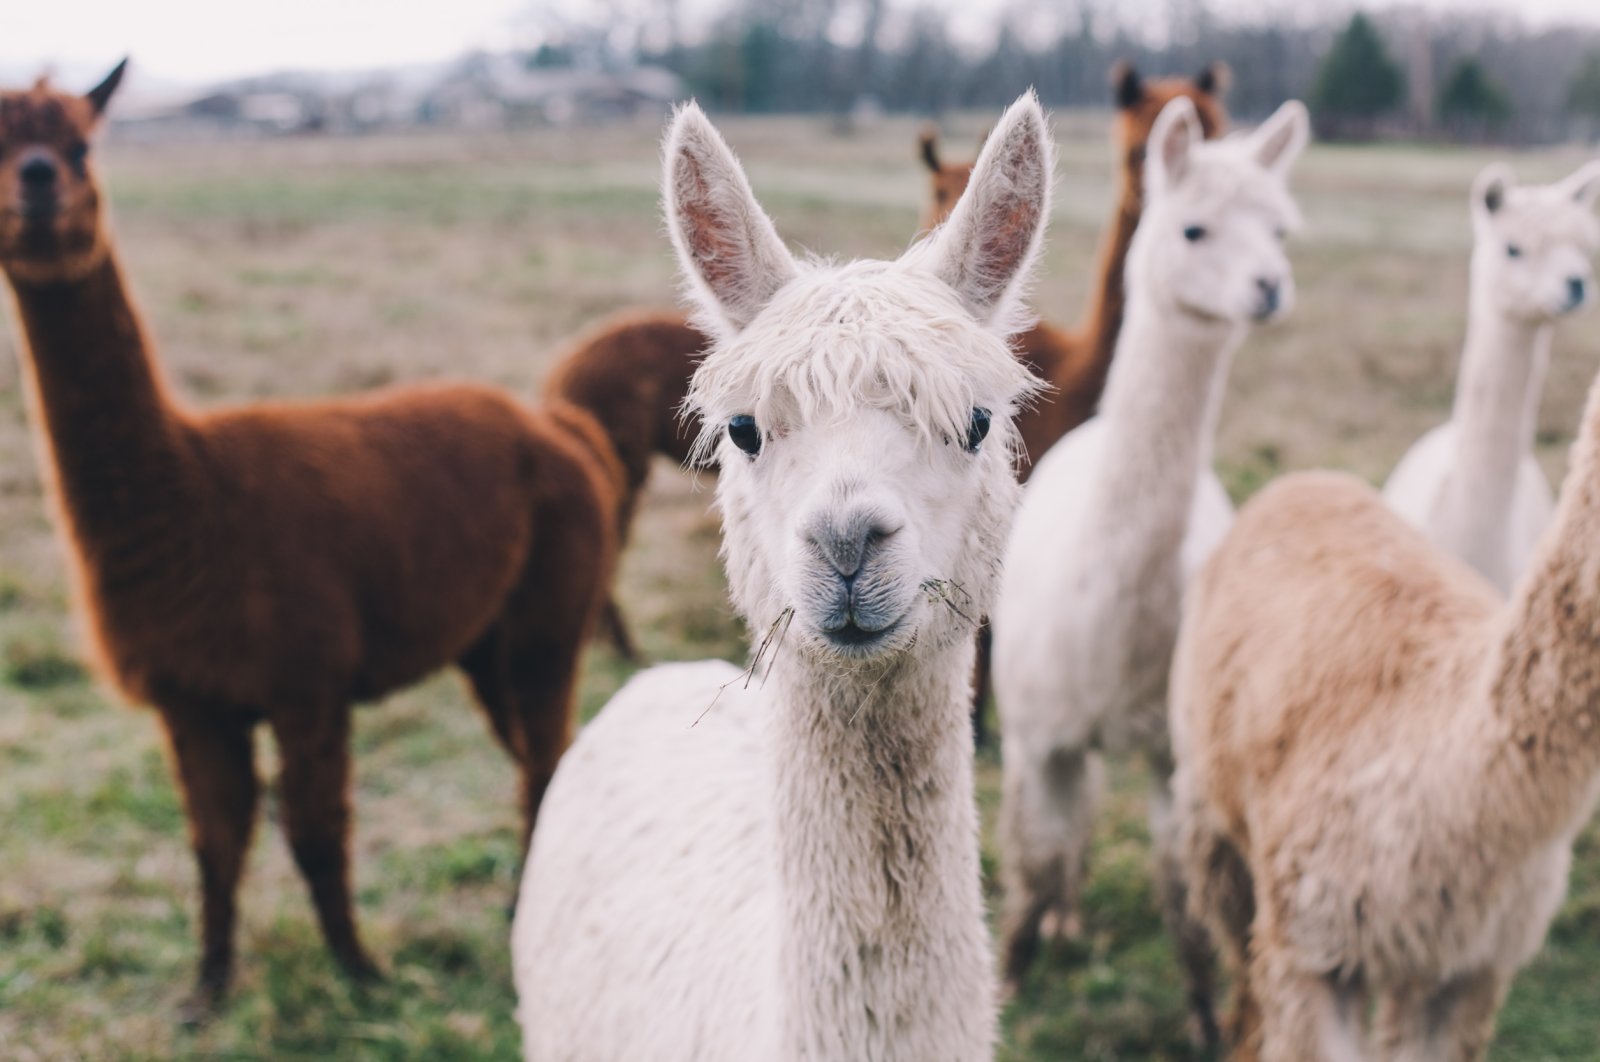 A small pack of Alpacas is seen in this undated file photo. (Shutterstock Photo)